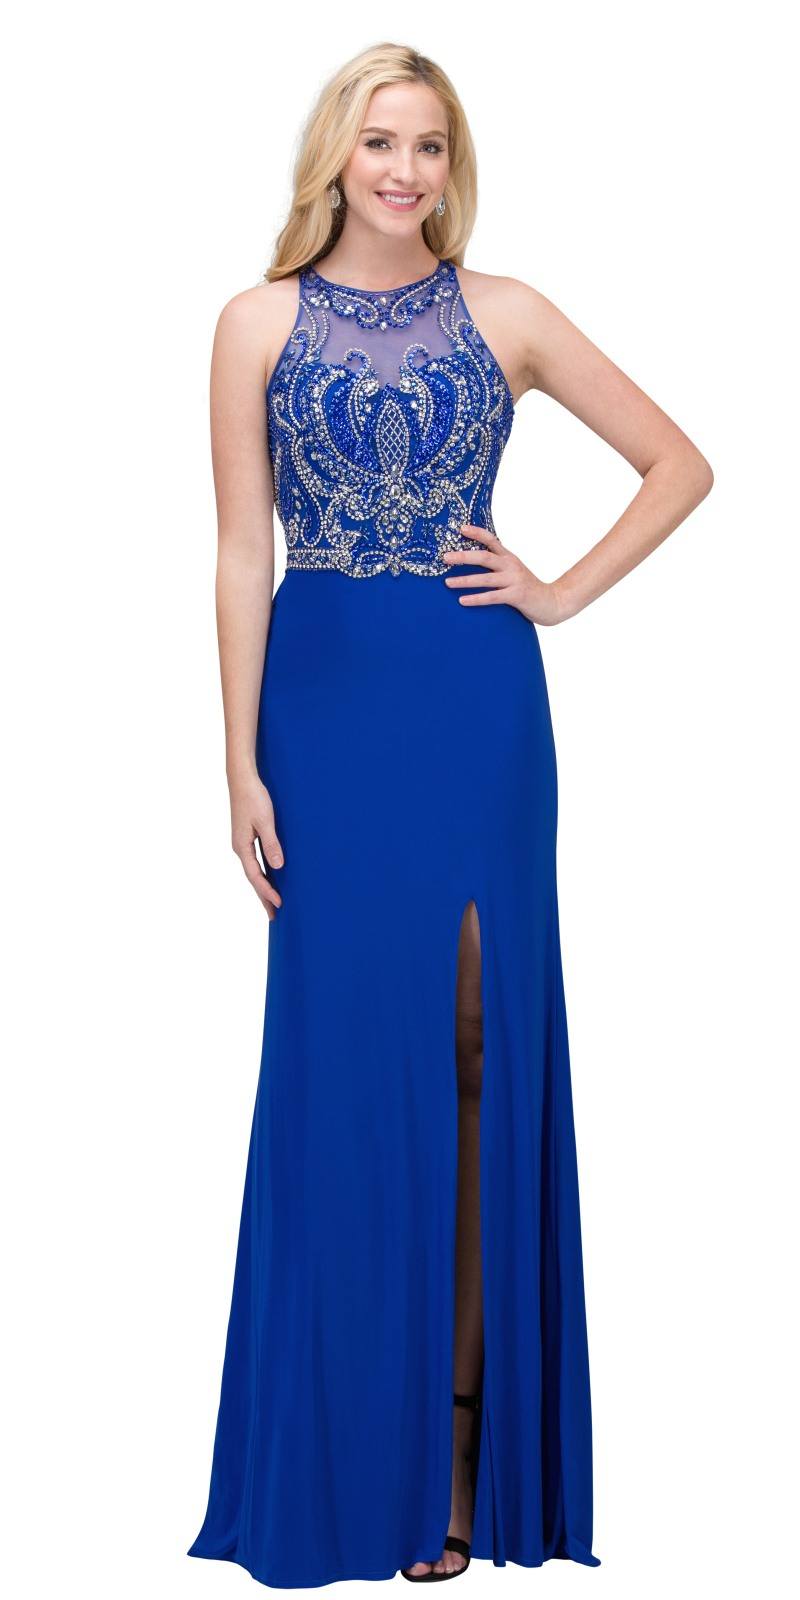 Starbox USA 17191 Royal Blue Beaded Long Prom Dress Cut Out Back with ...